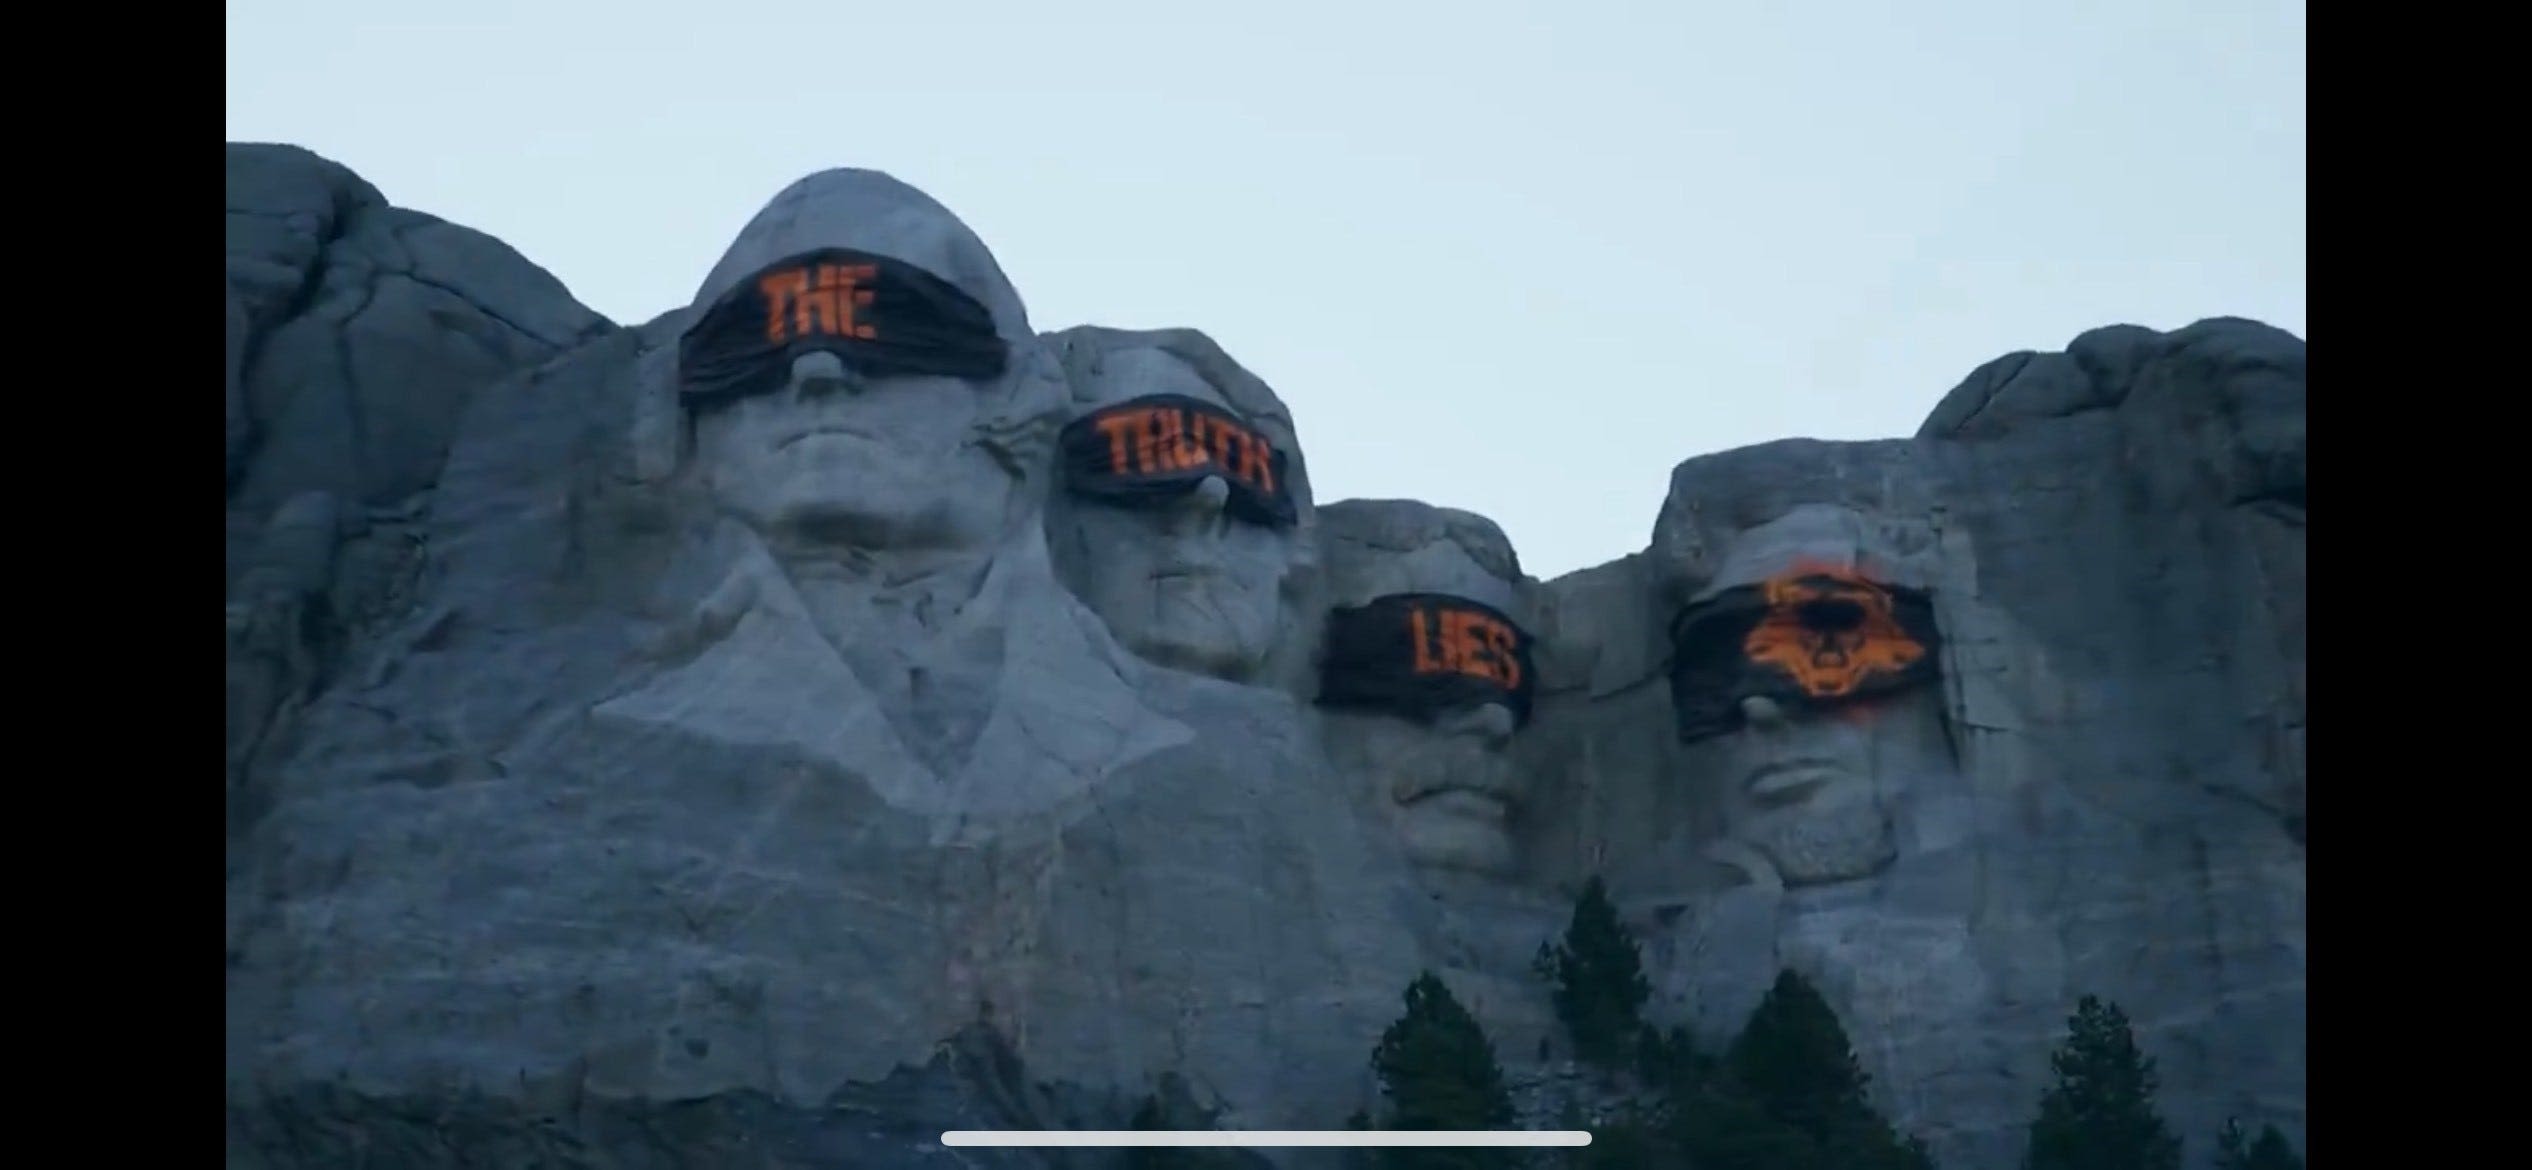 Mount Rushmore 'blindfolded' in apparent teaser for new Call of Duty video game series